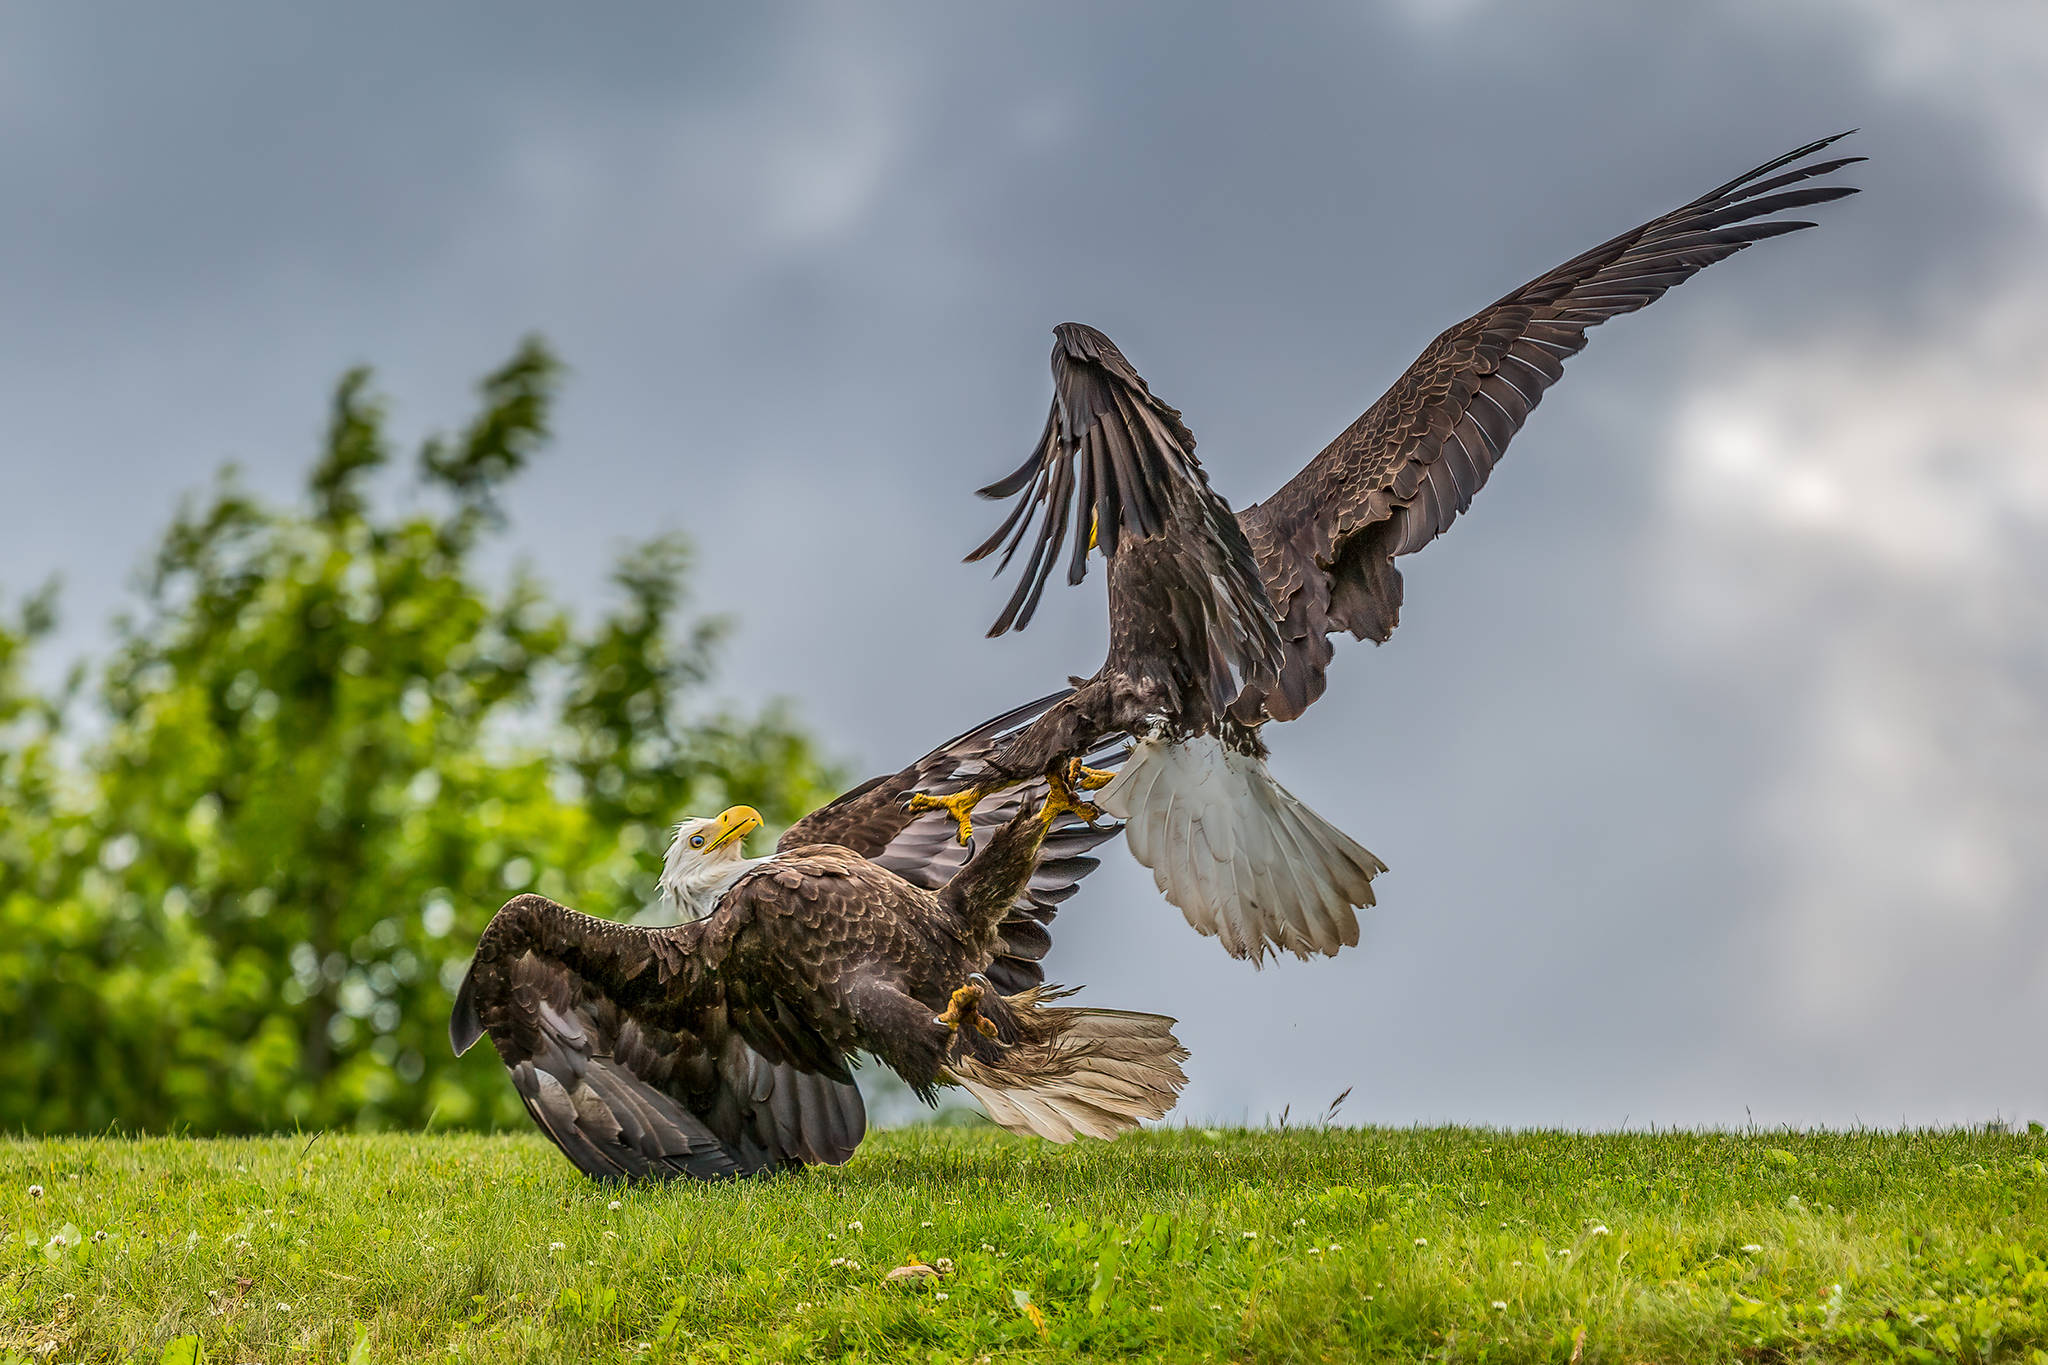 s the bird sitting, is the background busy? A bird in flight, landing, feeding or two eagles fighting one another spins an interesting tale and can be a compelling story. This photo was shot at DIPAC in July 2020 with a Canon 5D Mark III, Tamron 70-200, 1/1600 sec at f2.8, ISO 100. (Courtesy Photo / Heather Holt)
s the bird sitting, is the background busy? A bird in flight, landing, feeding or two eagles fighting one another spins an interesting tale and can be a compelling story. This photo was shot at DIPAC in July 2020 with a Canon 5D Mark III, Tamron 70-200, 1/1600 sec at f2.8, ISO 100. (Courtesy Photo / Heather Holt)